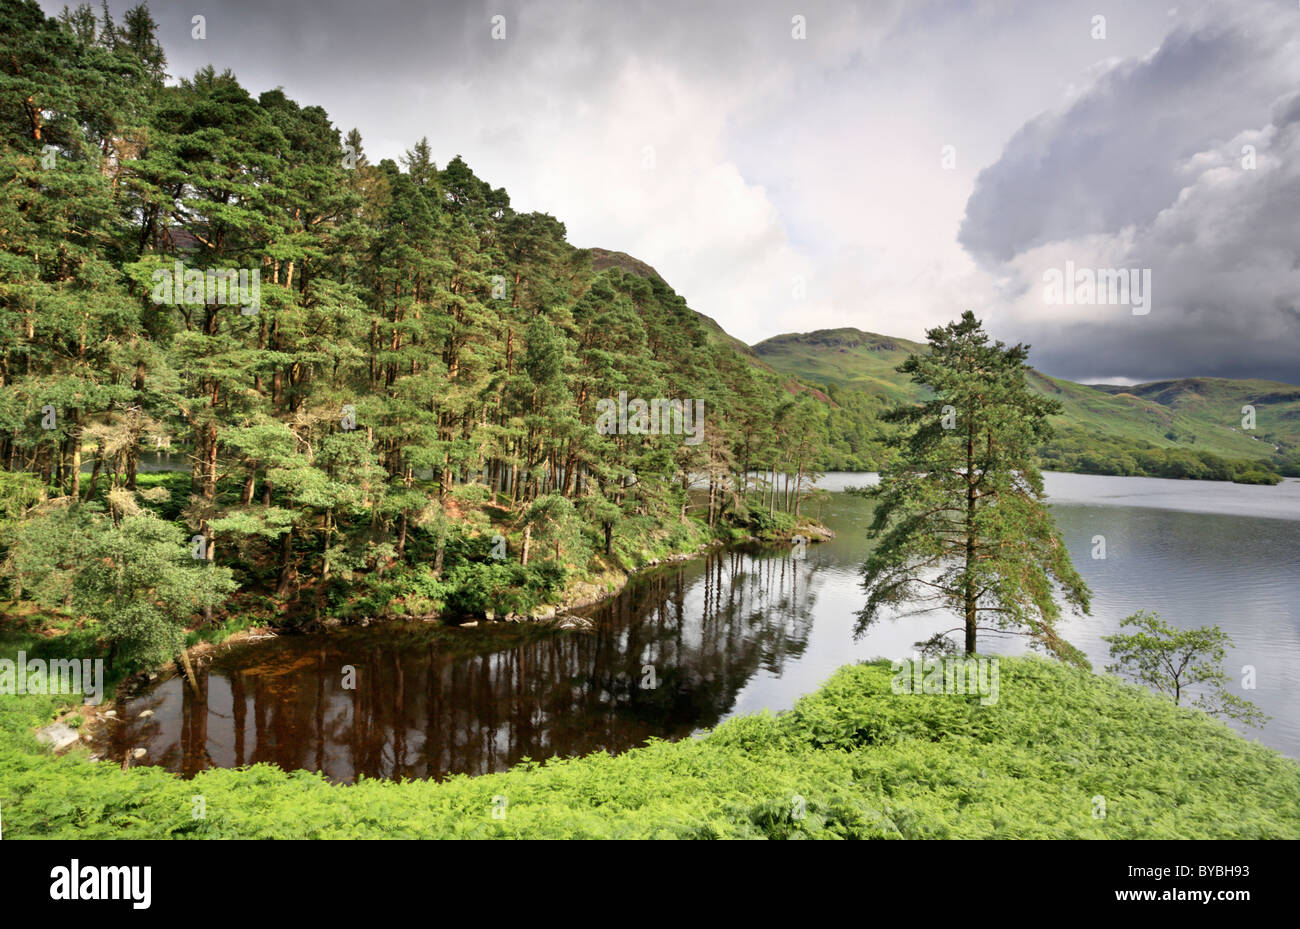 Tree's on the banks of Loch Trool in the Galloway Forest Park, Scotland Stock Photo